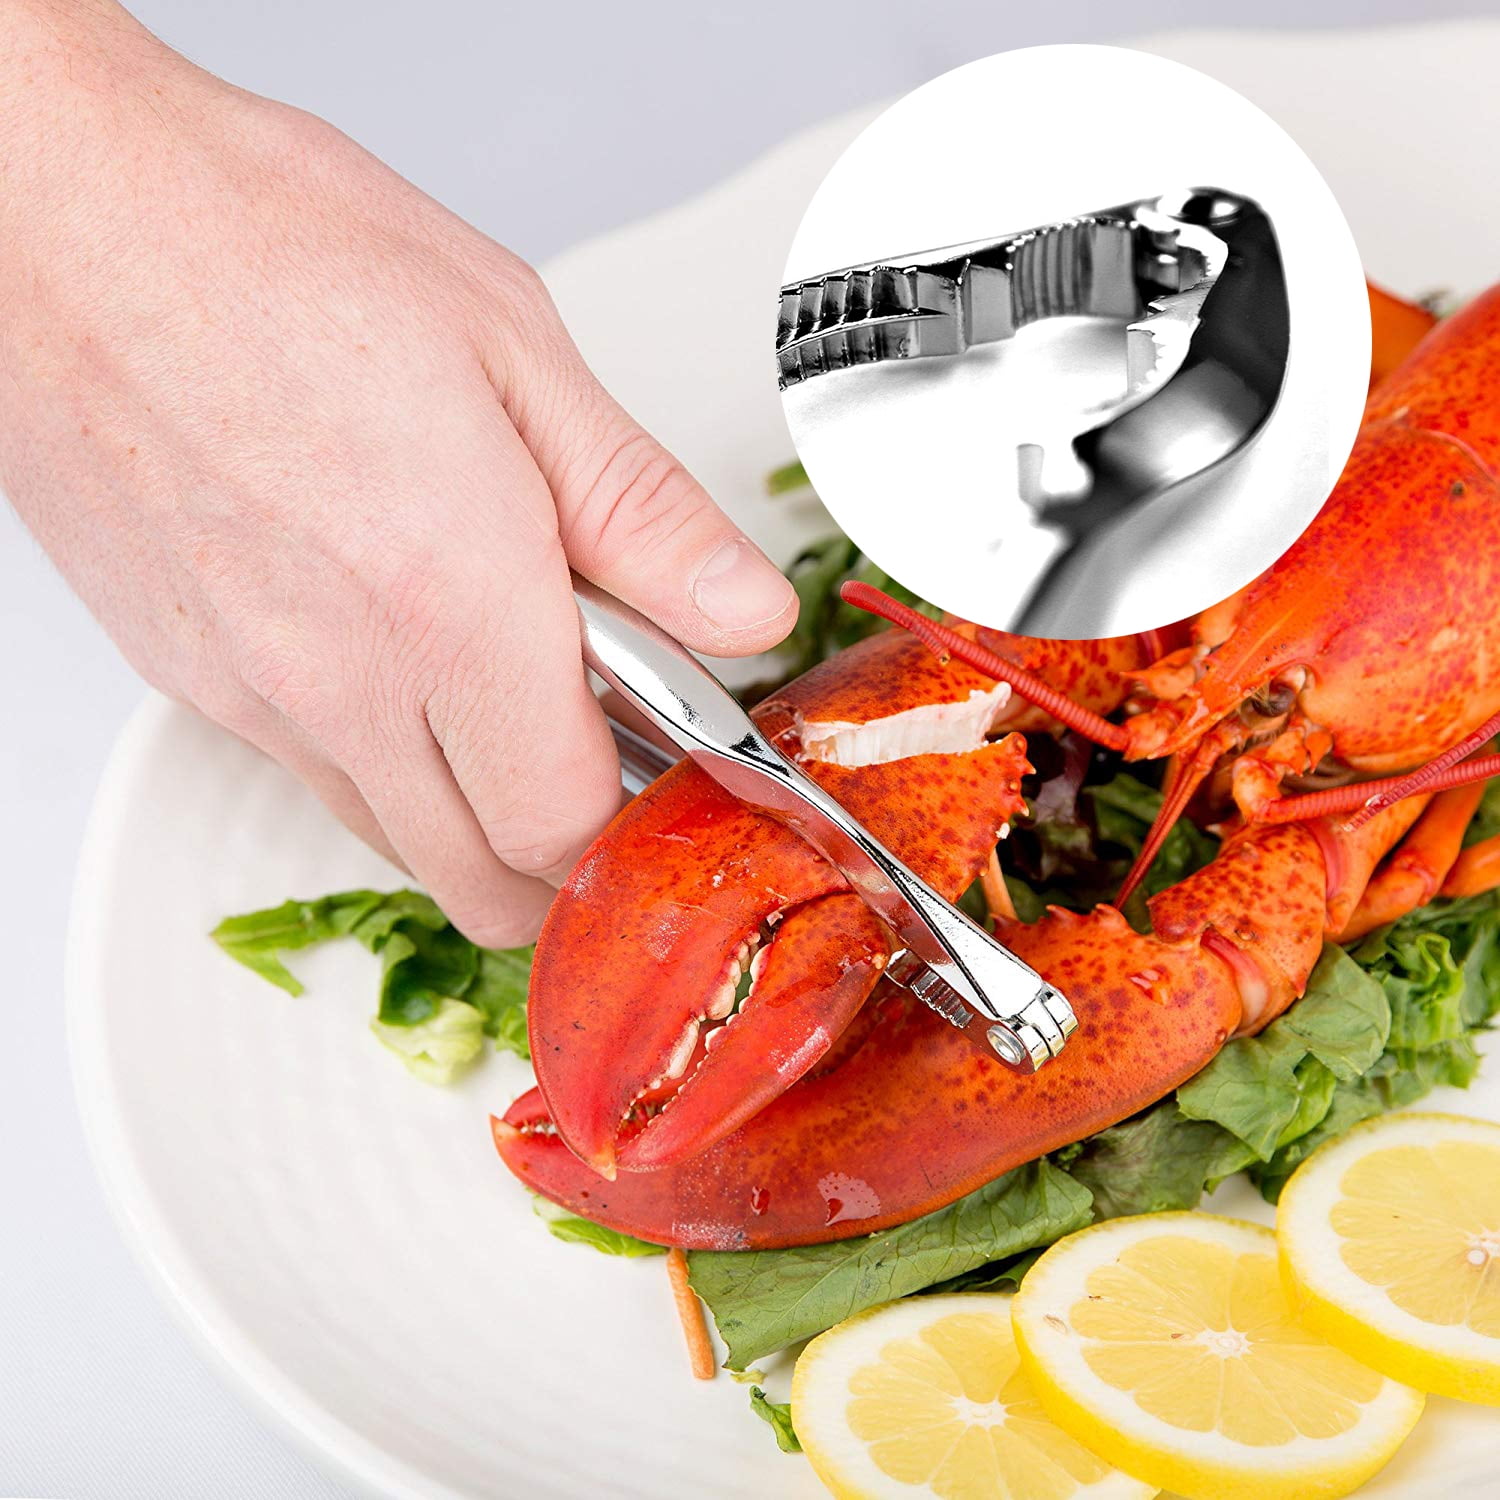 6-Piece Crab Leg Crackers and Tools Lelesta Seafood Tools Lobster Crackers and Picks Set Stainless Steel Seafood Crackers & Forks Nut Cracker Set with Storage Box 